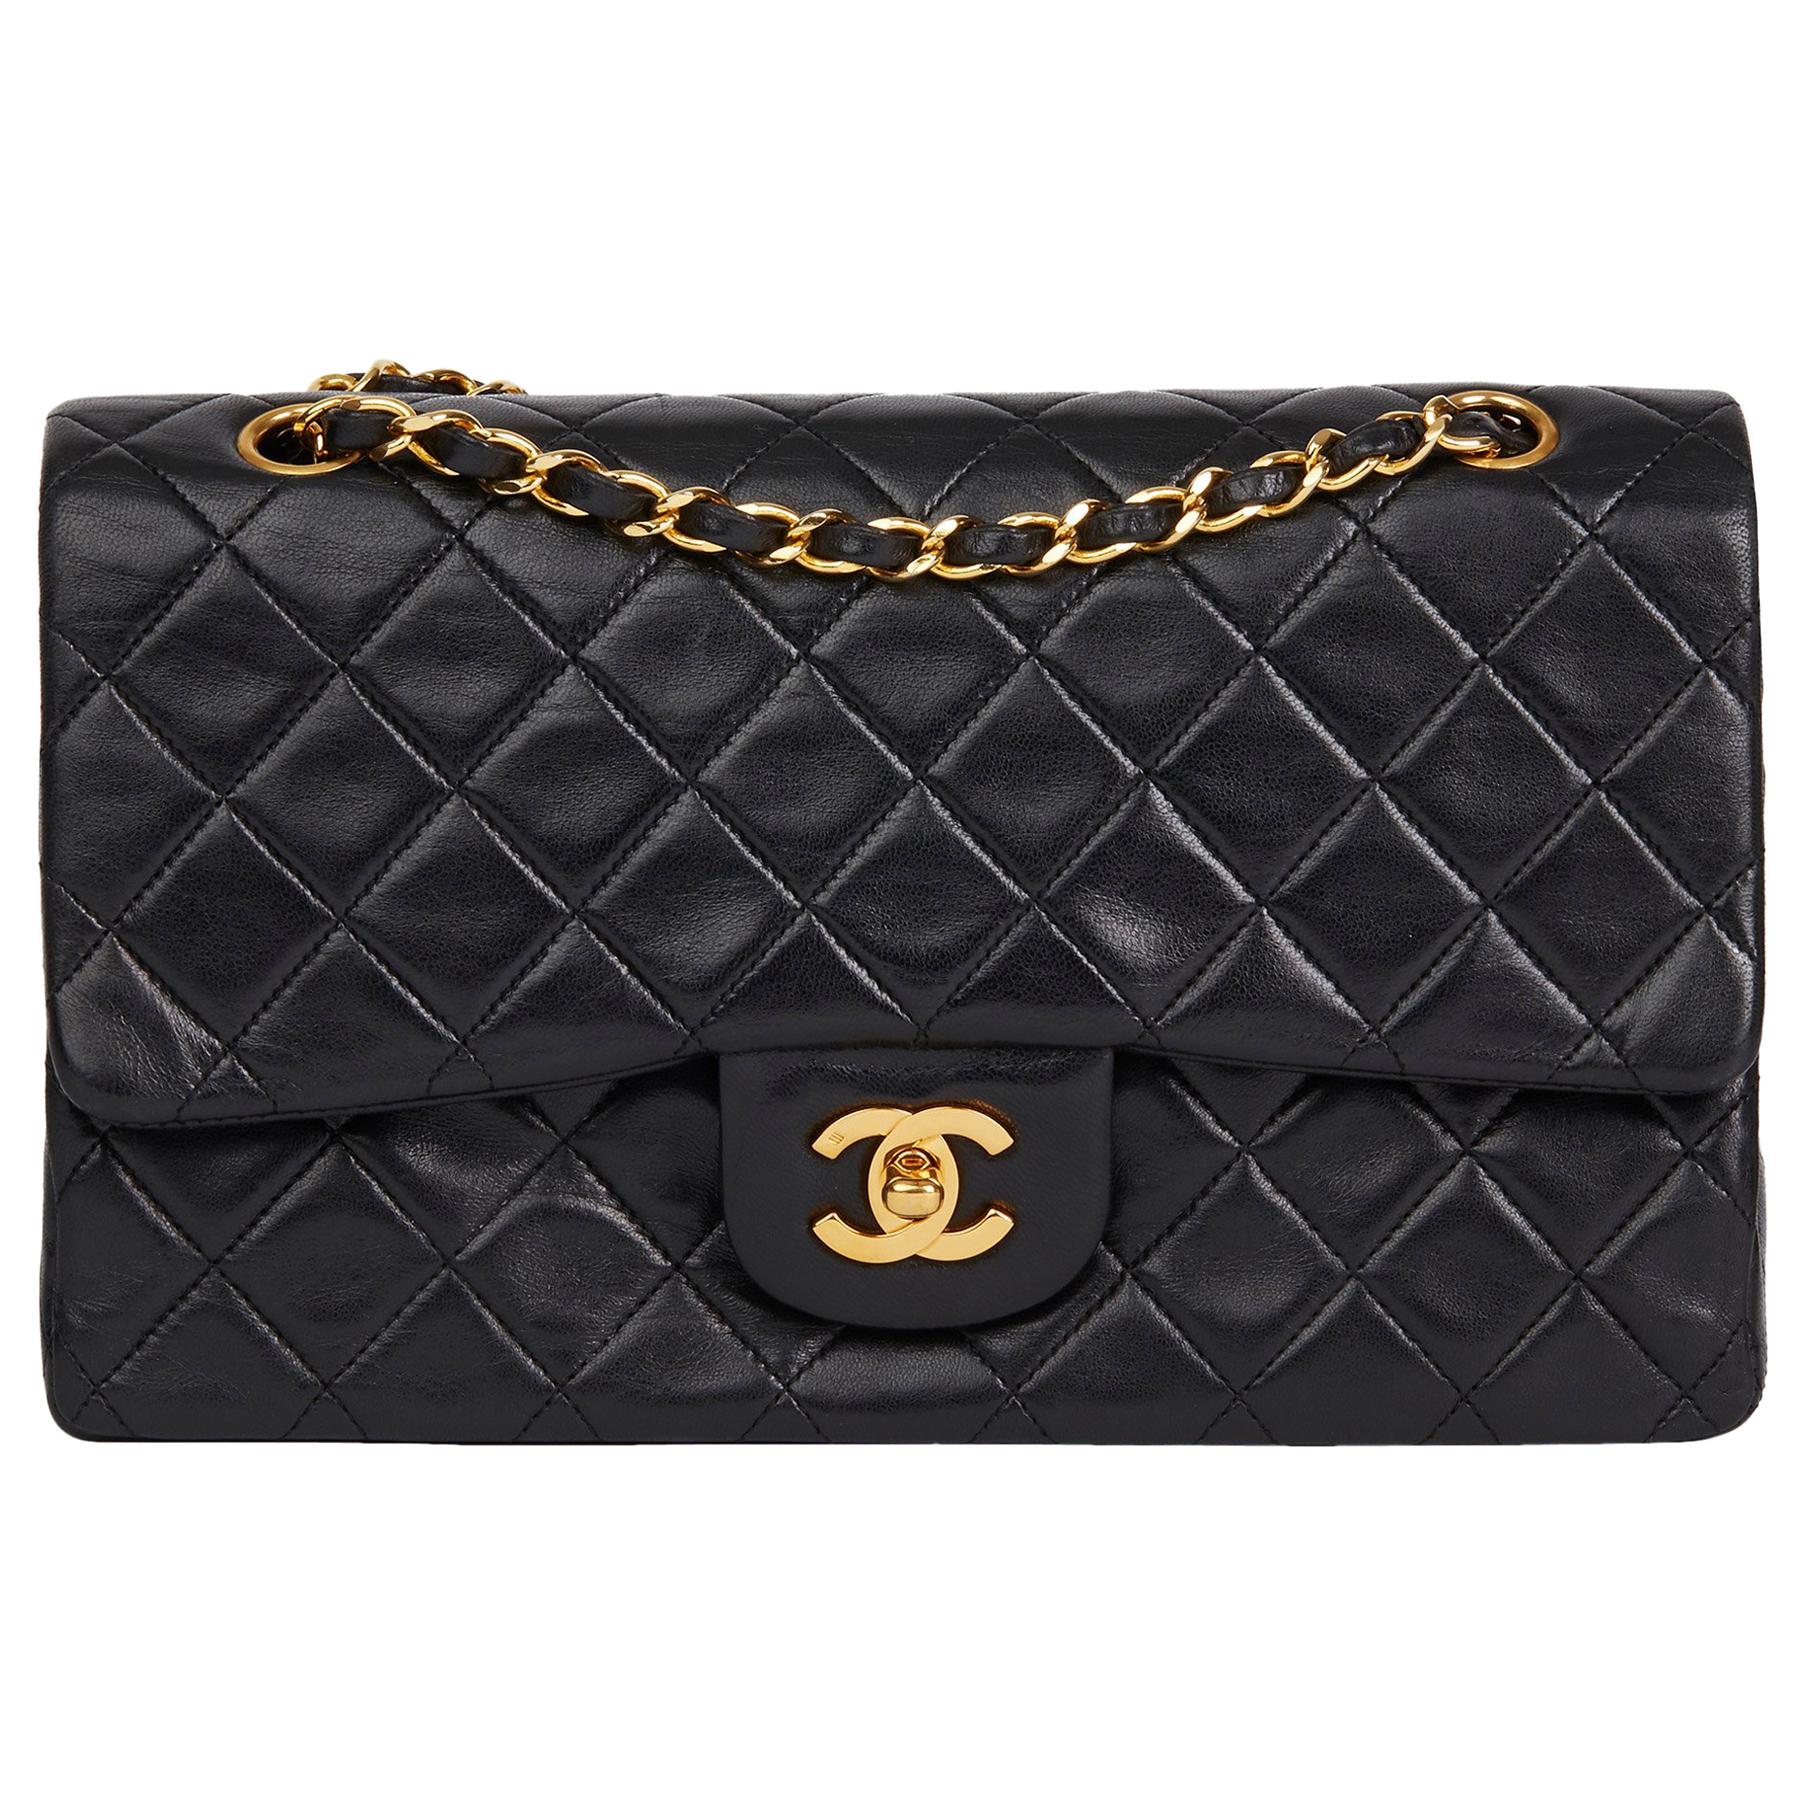 1990 Chanel Black Quilted Lambskin Vintage Medium Classic Double Flap Bag